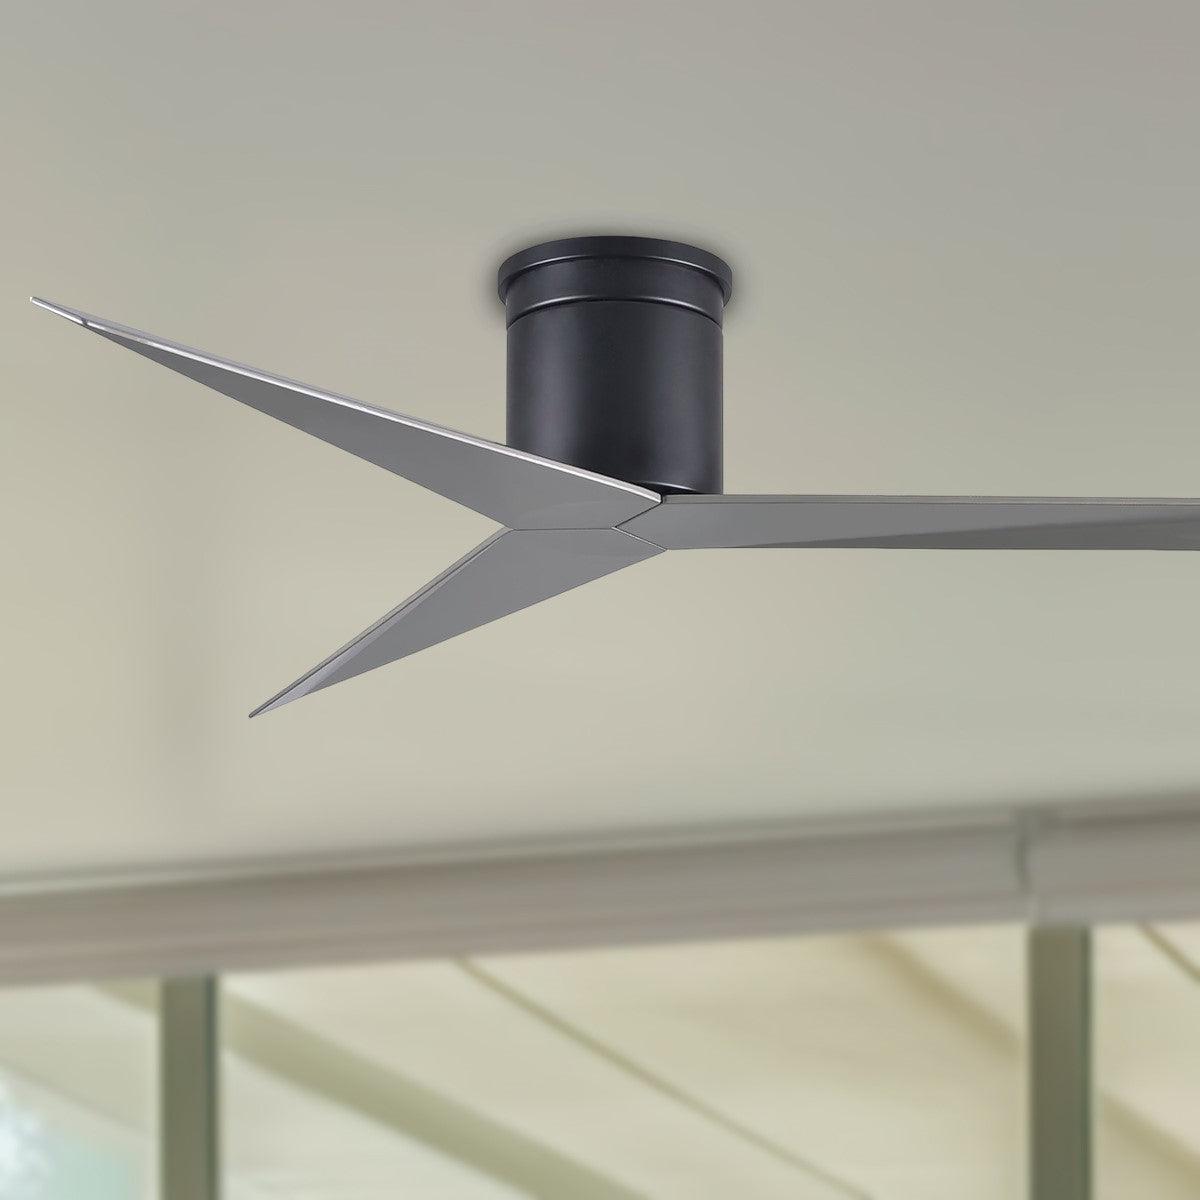 Eliza 56 Inch Low Profile Outdoor Ceiling Fan, Wall/Remote Control Included